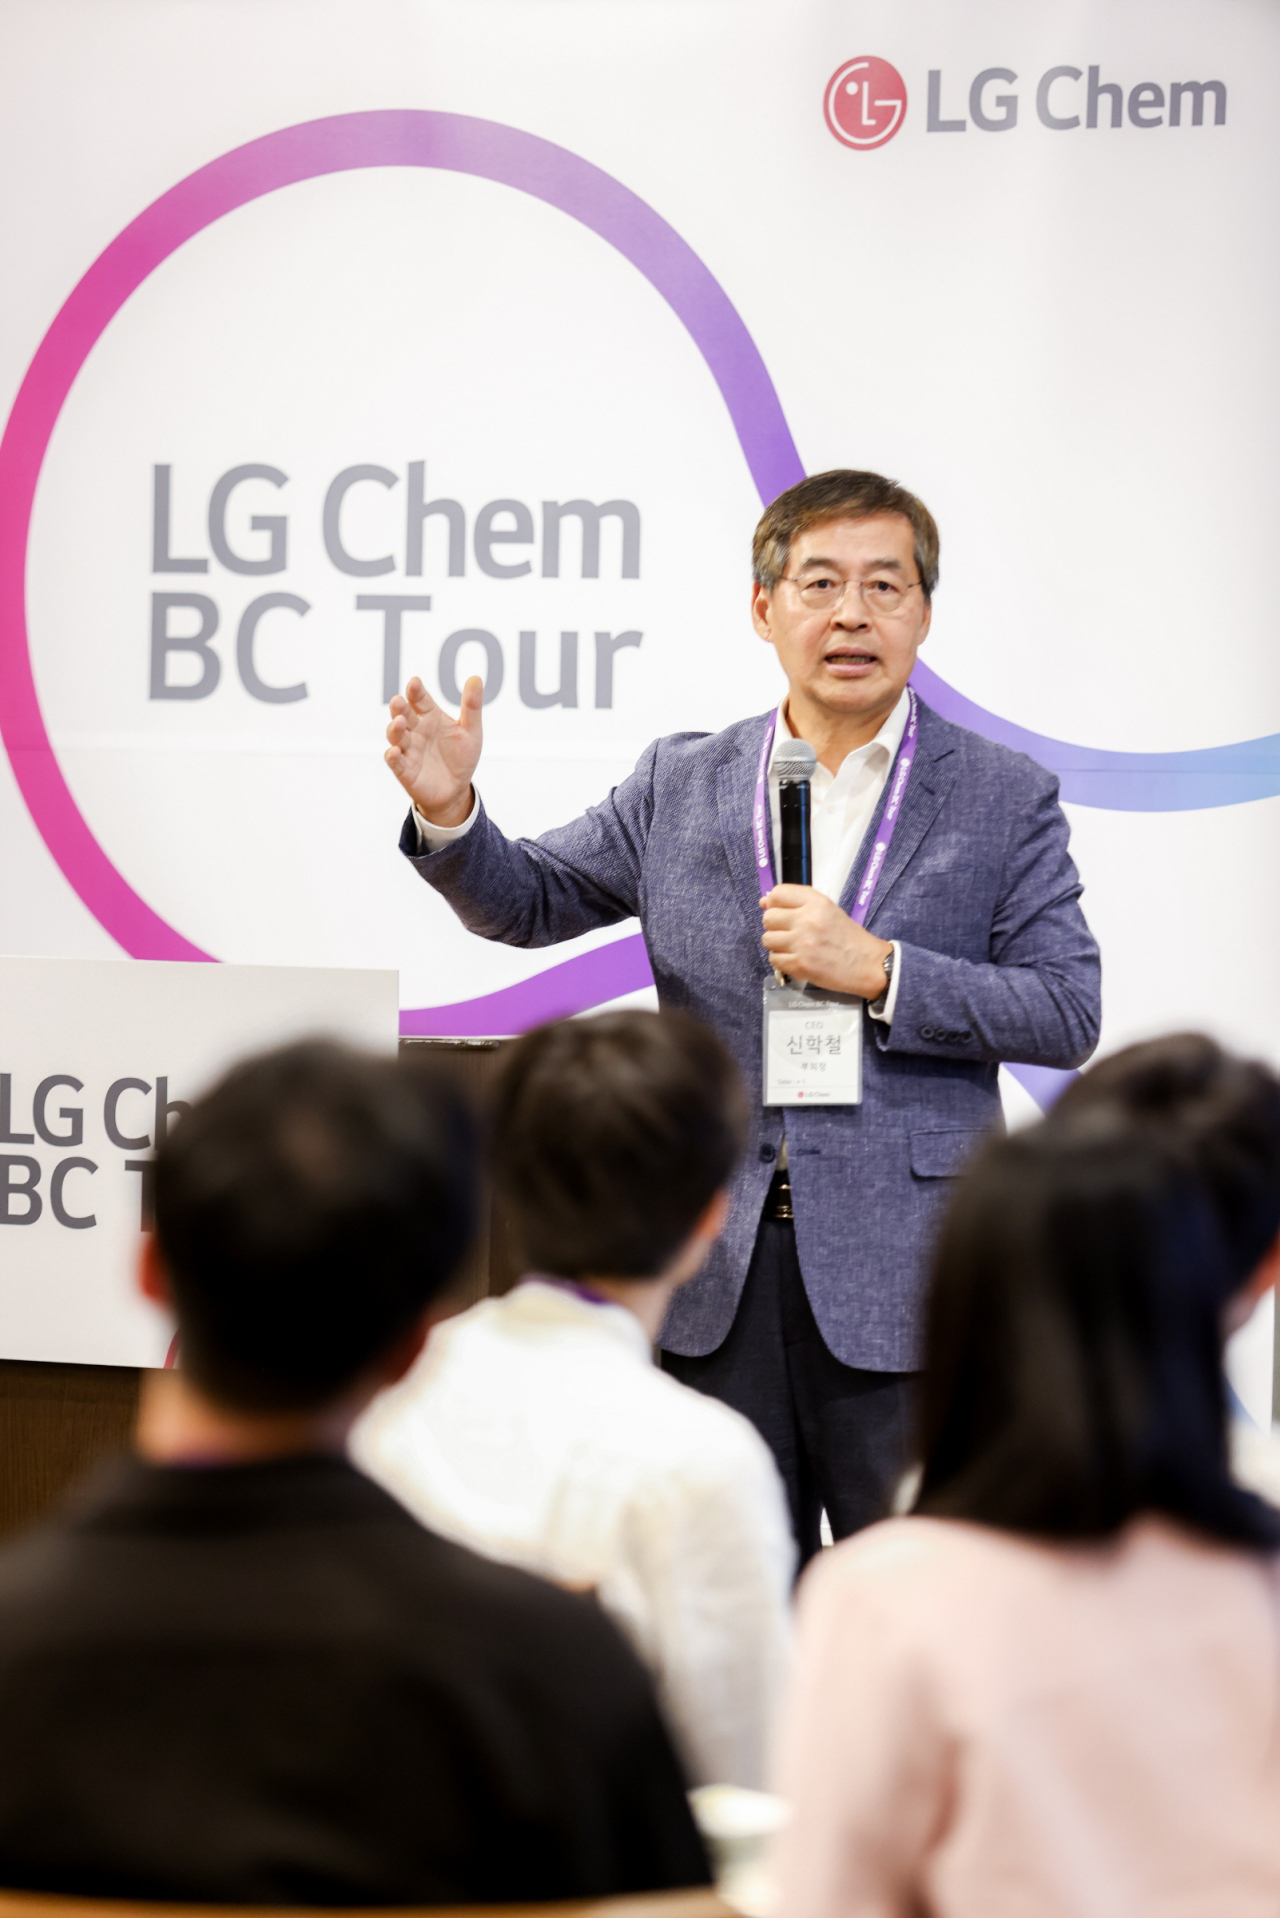 LG Chem CEO Shin Hak-cheol speaks at a global talent acquisition event held at the Intercontinental Tokyo Bay Hotel on Thursday. (LG Chem)